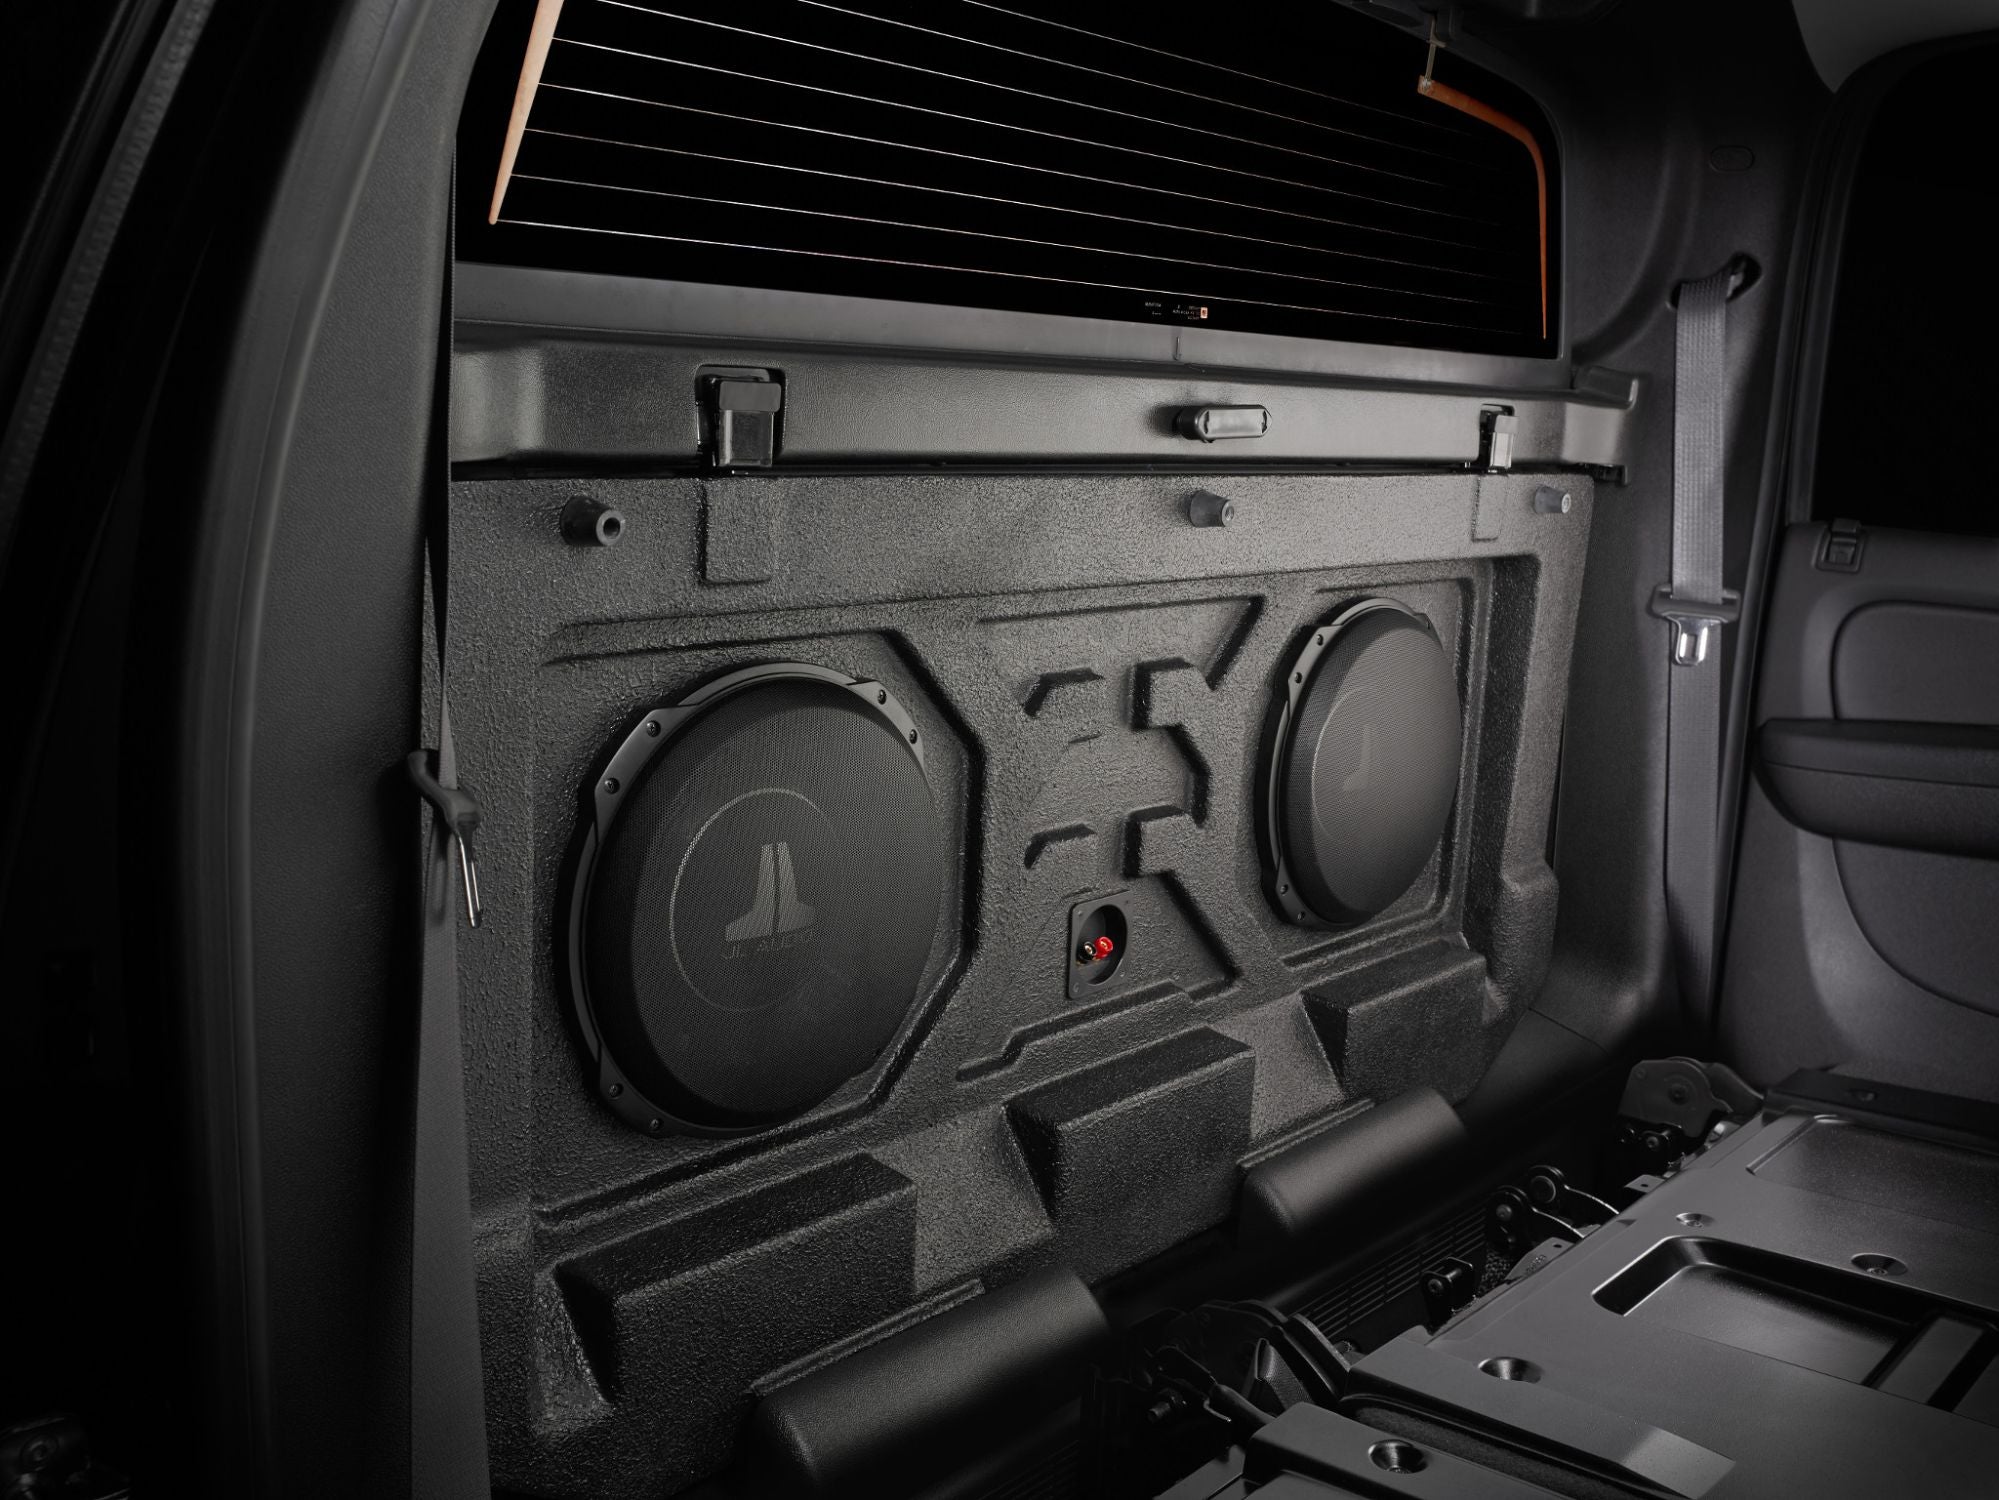 SB-GM-AVAL-12TW3 Stealthbox Installed in Vehicle